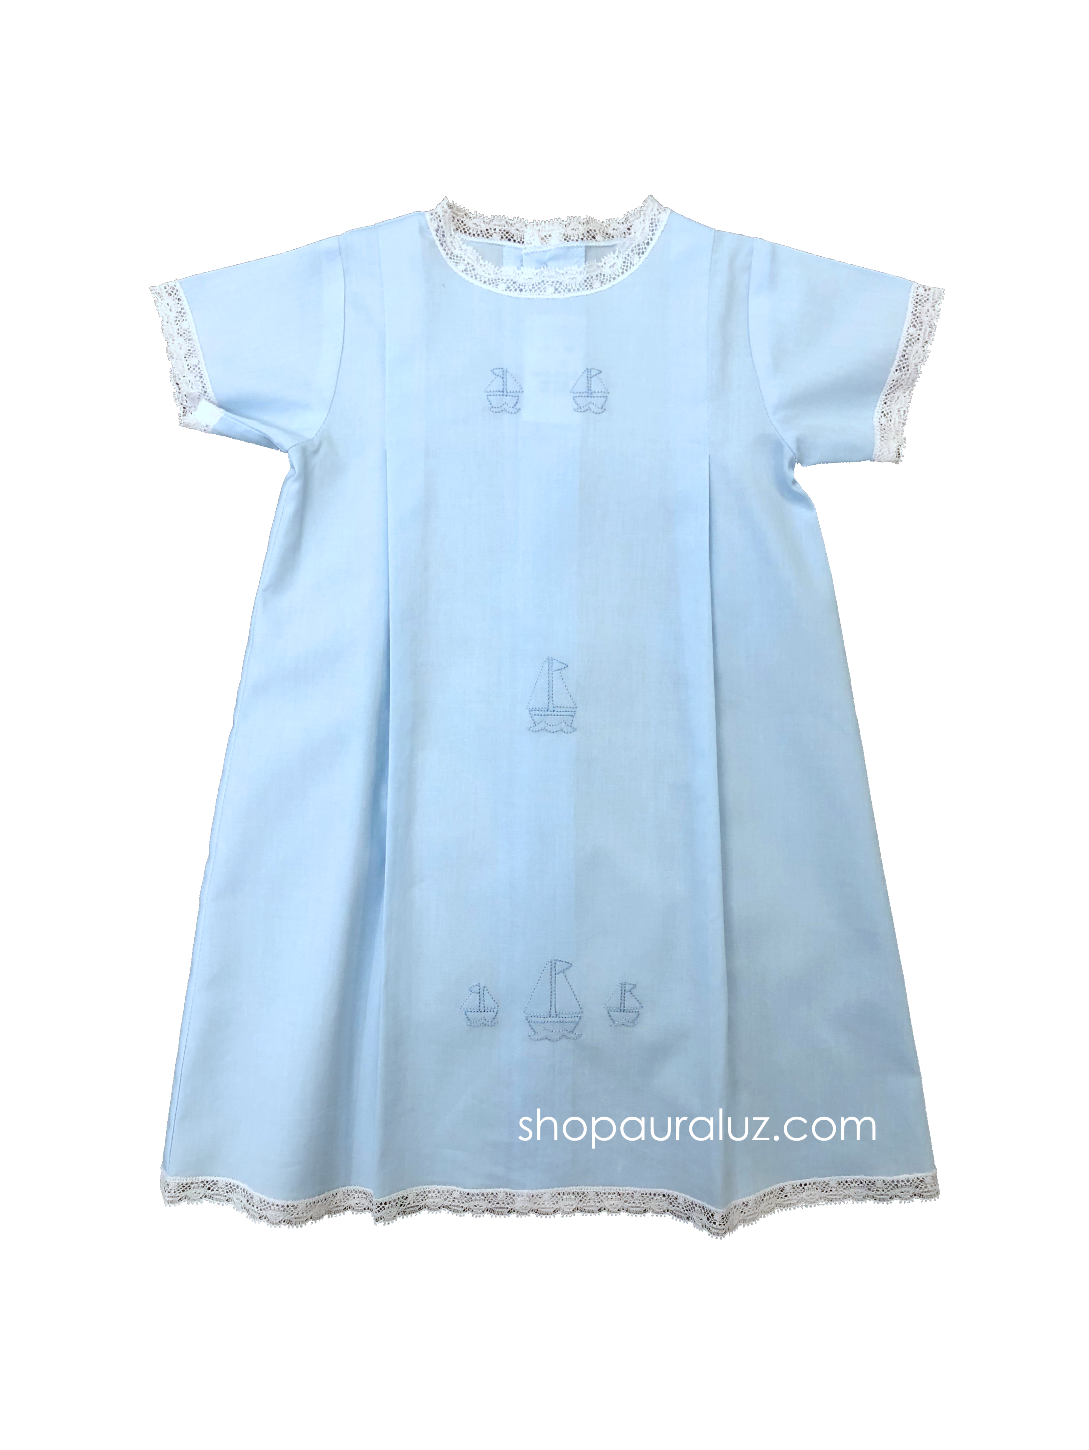 Auraluz Boy Day Gown..Blue with white lace and embroidered sail boats